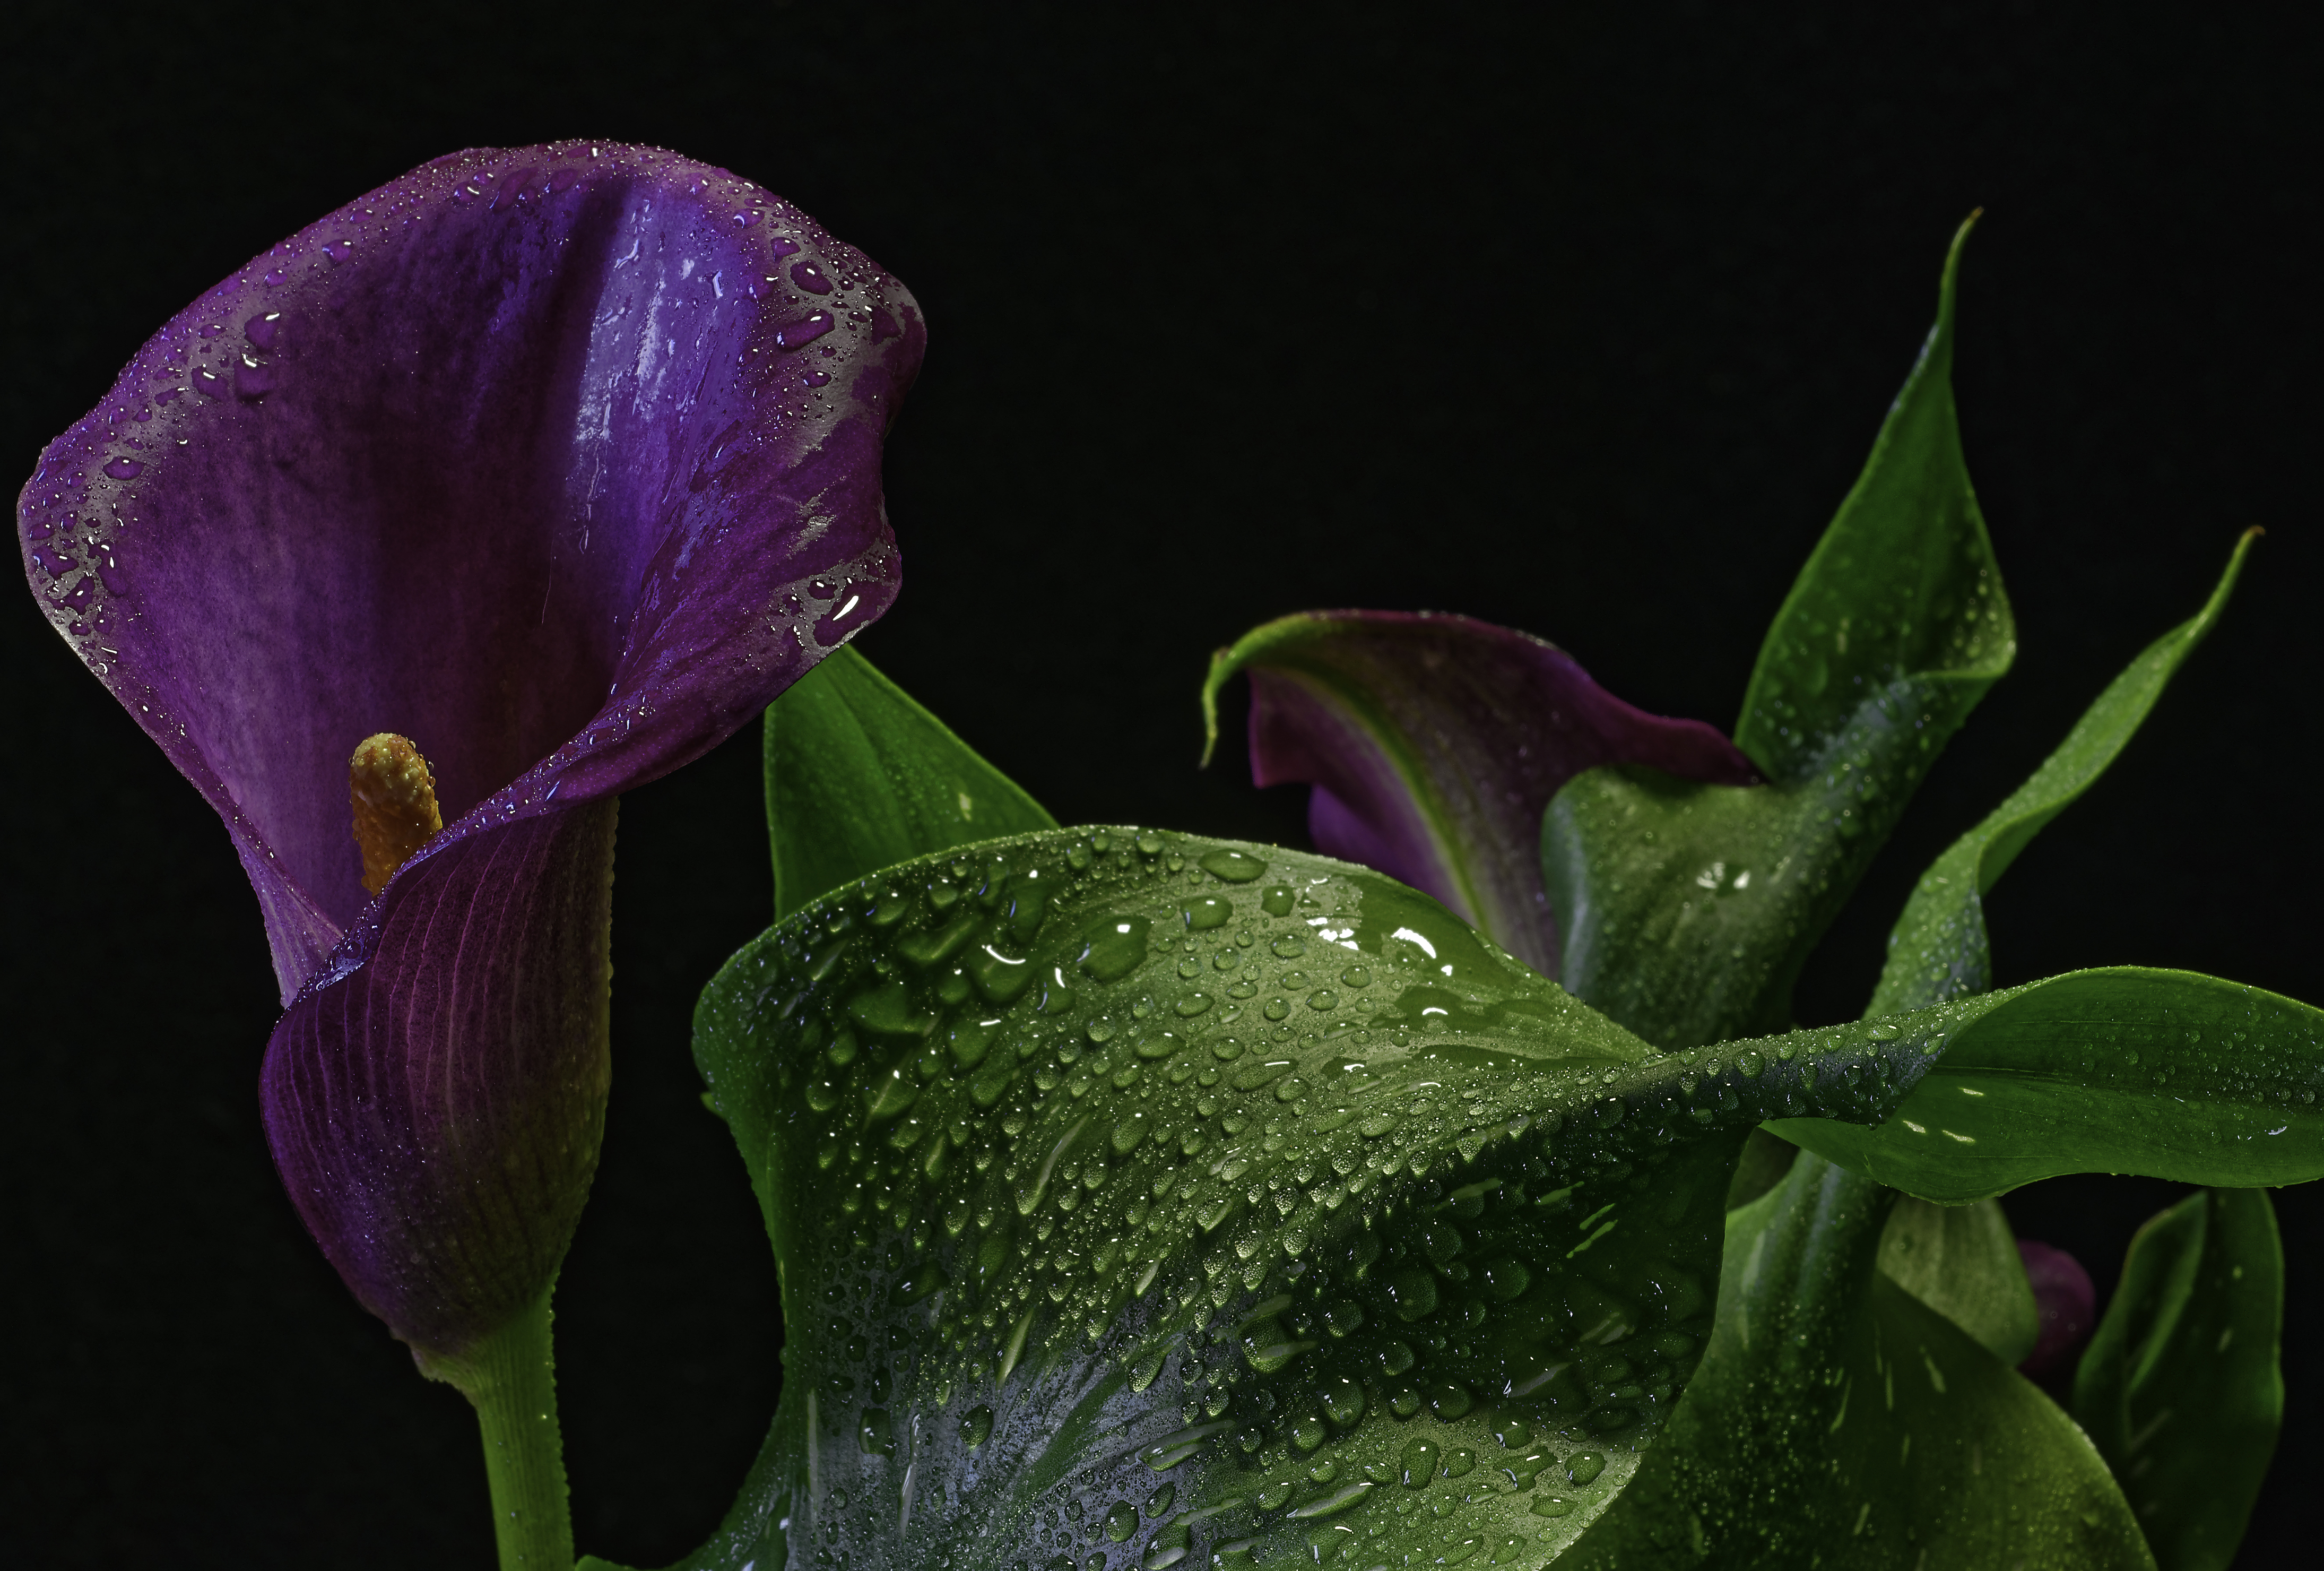 earth, calla lily, close up, flower, nature, purple flower, water drop, flowers